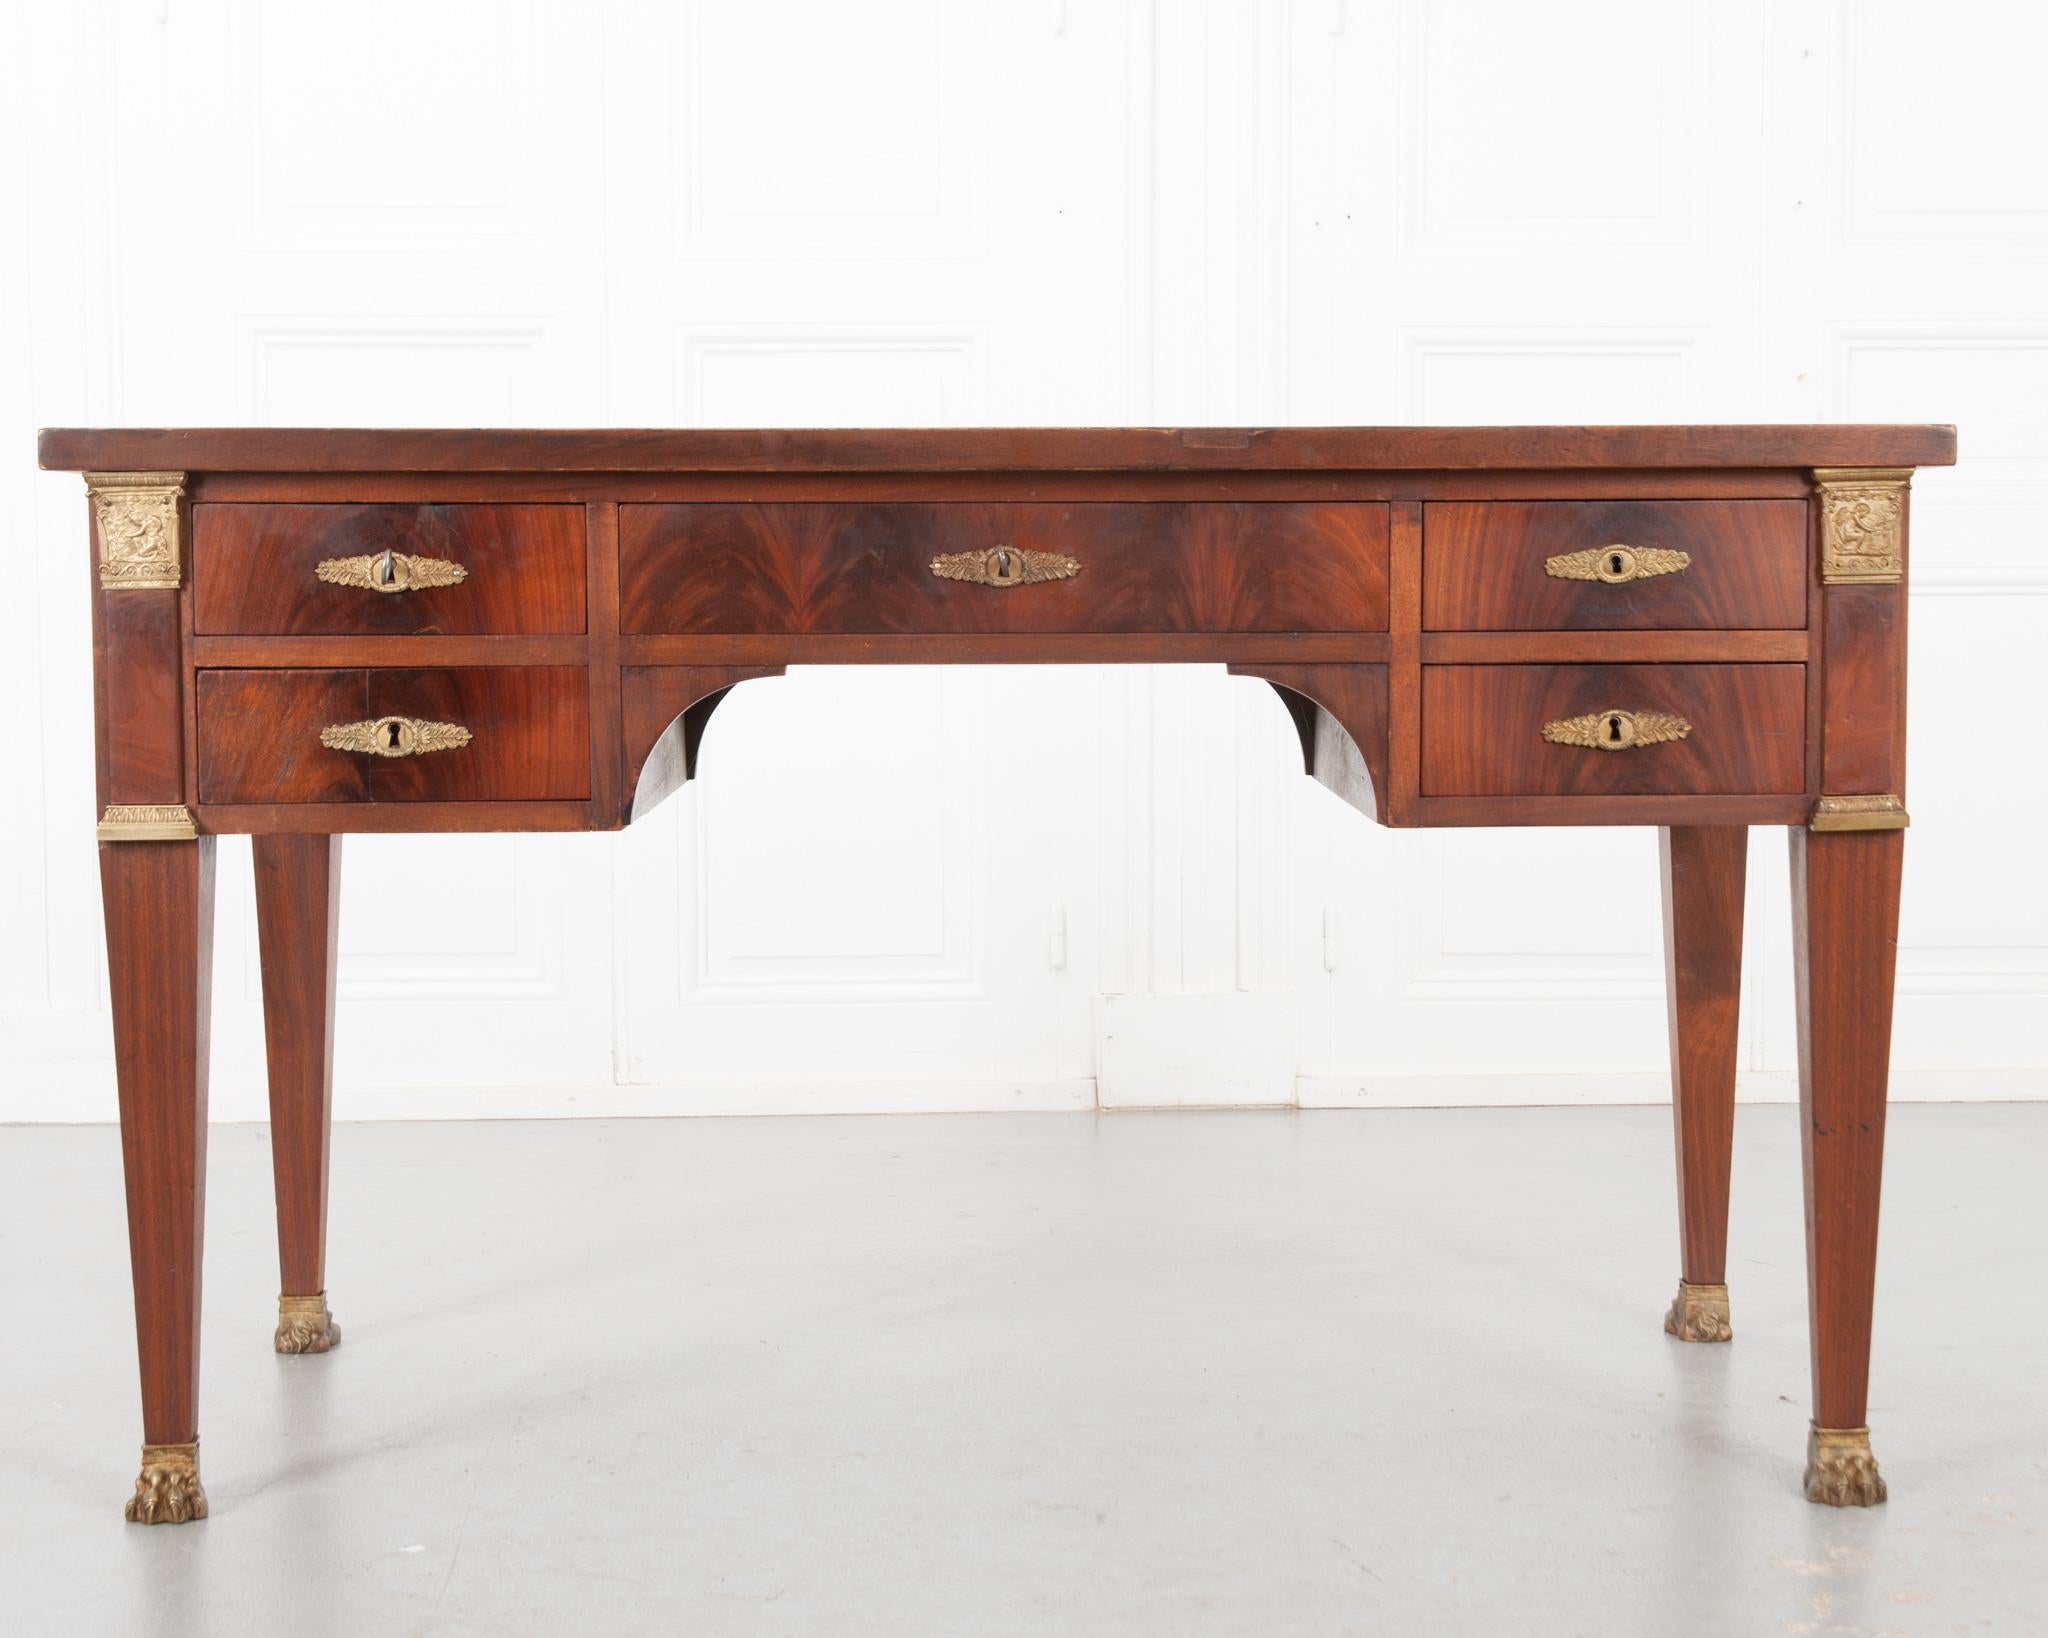 A handsome Empire desk from 19th century France. Made from a beautiful mahogany that’s been cleaned and polished to reveal the vibrant grain. The top is inset with the original worn caramel toned leather, detailed with gold tooling around the